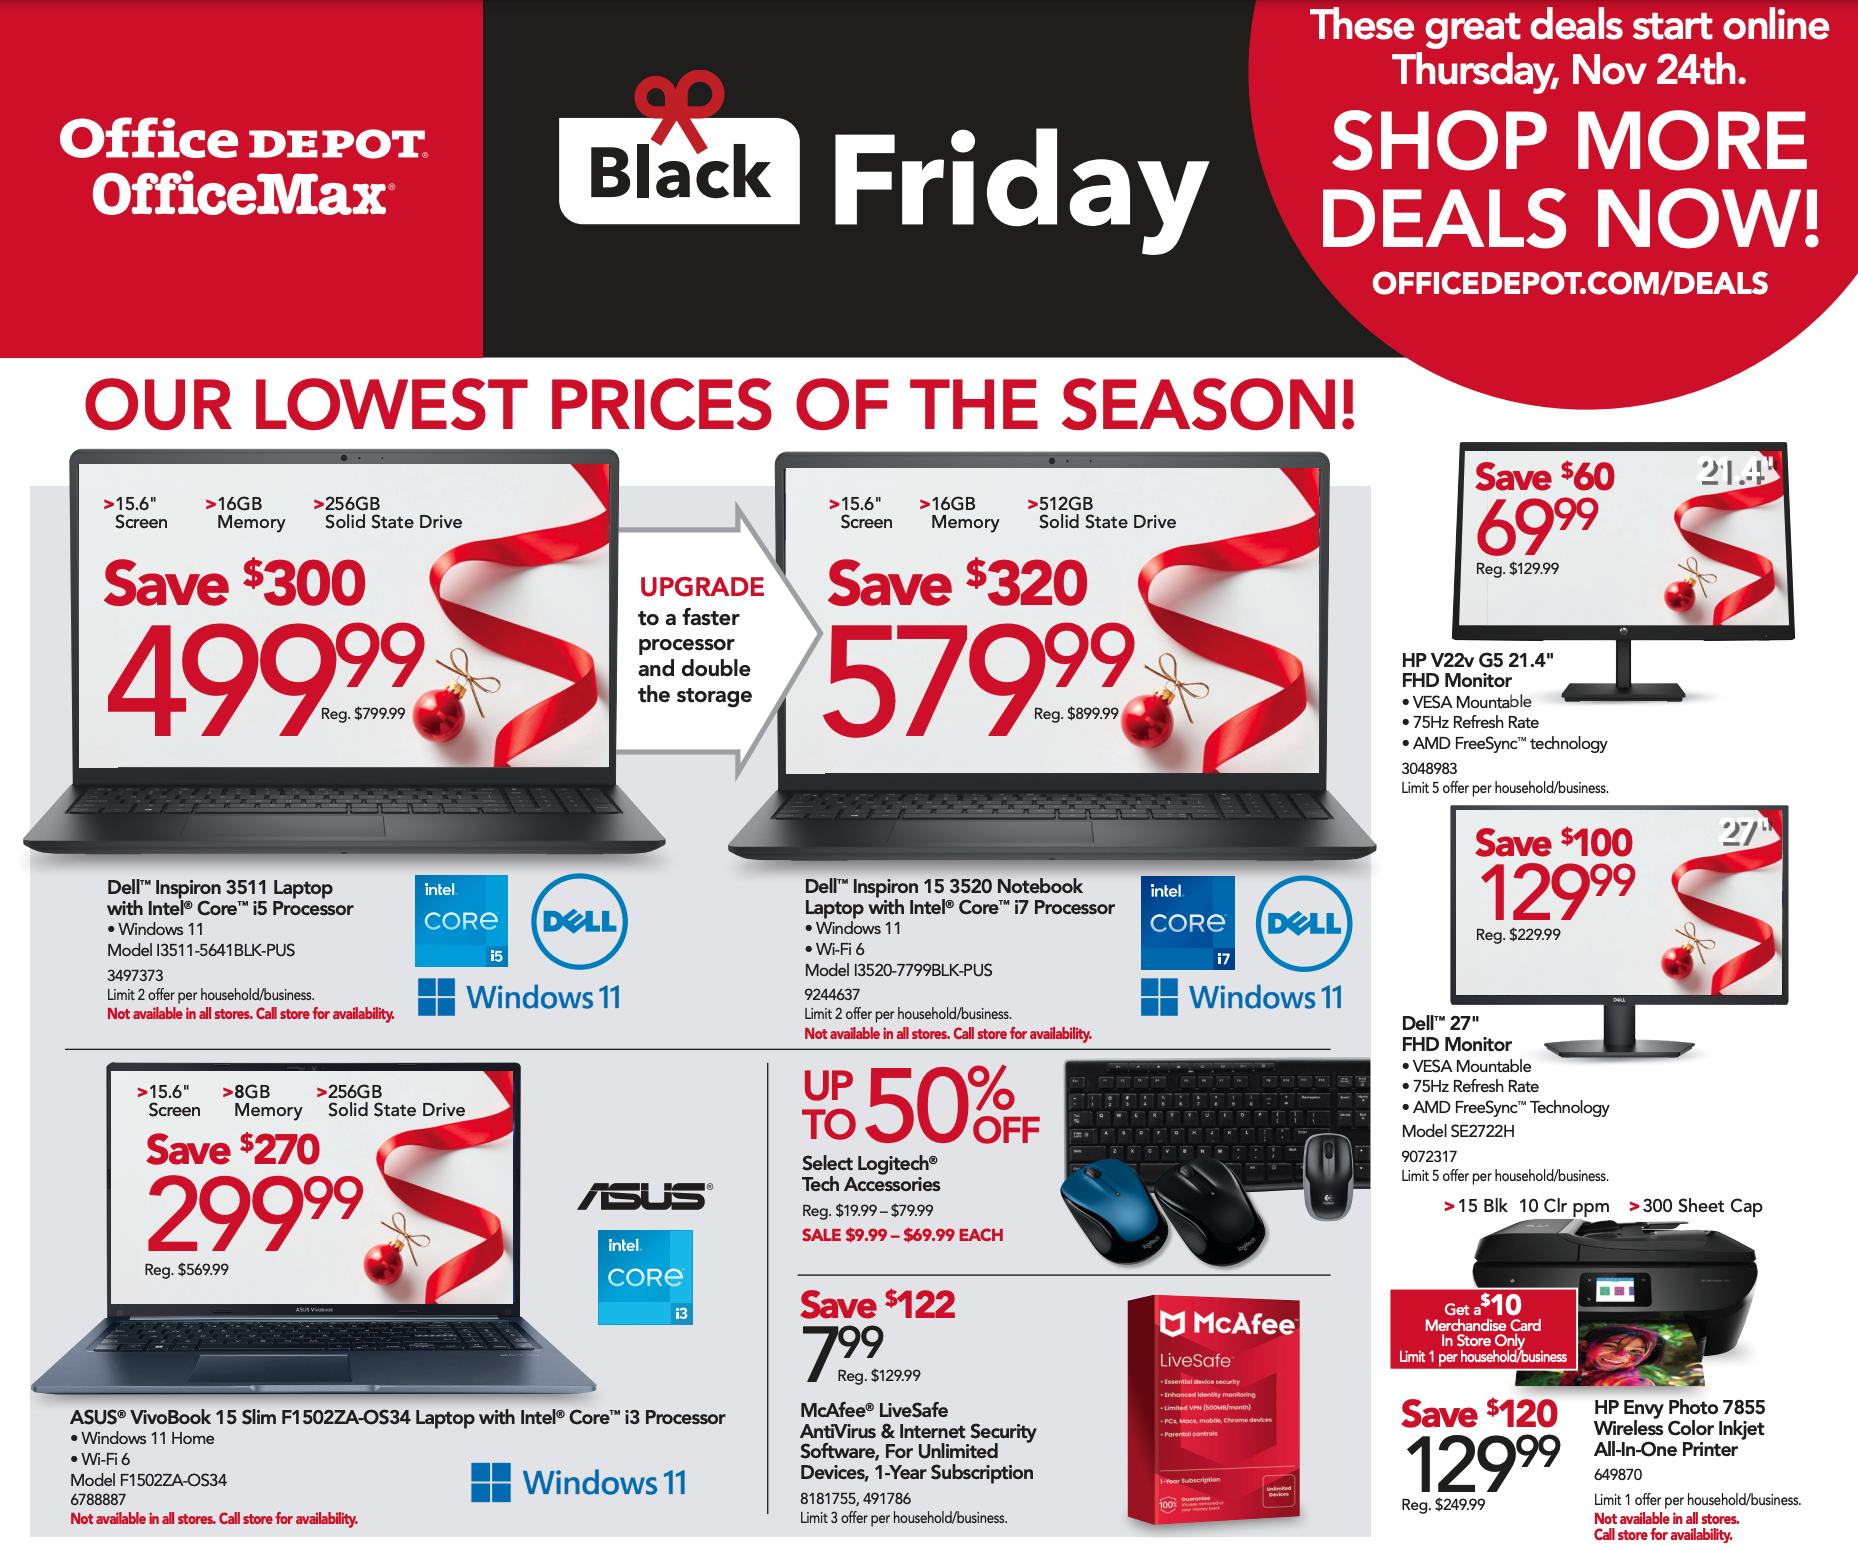 Office Depot Black Friday 2022 Deals: Save $300 Now - The Krazy Coupon Lady